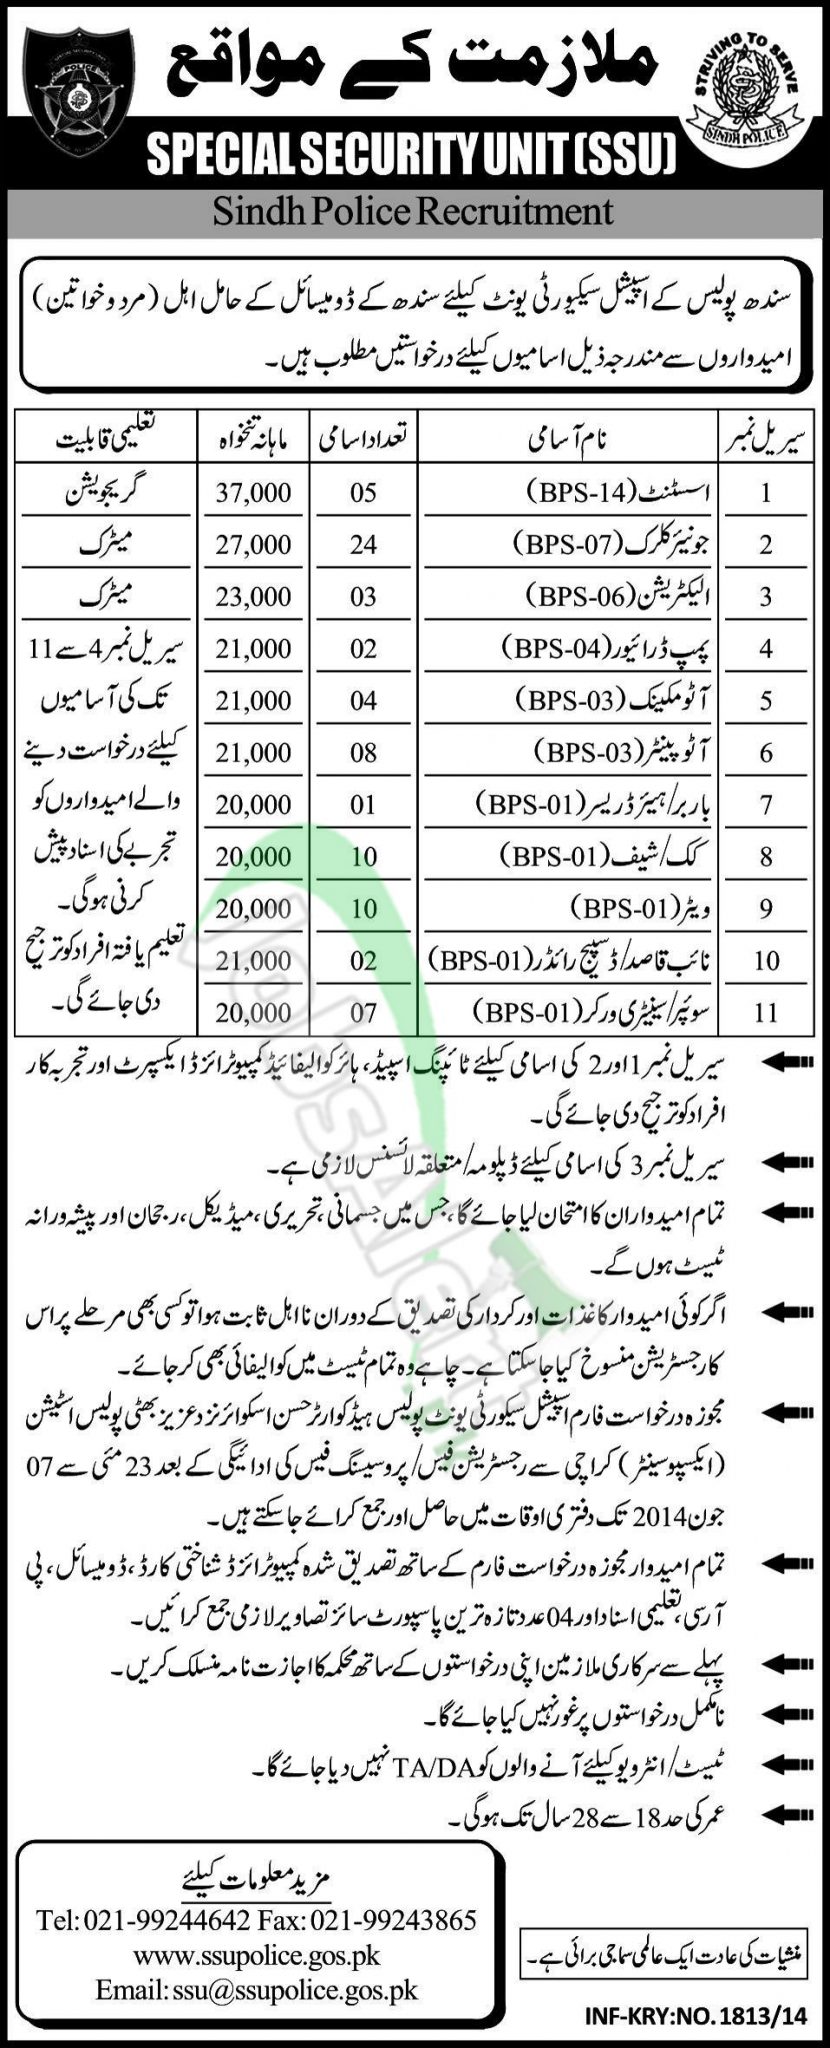 Special Security Unit (SSU) Sindh Police Job Test Date 6th July 2014